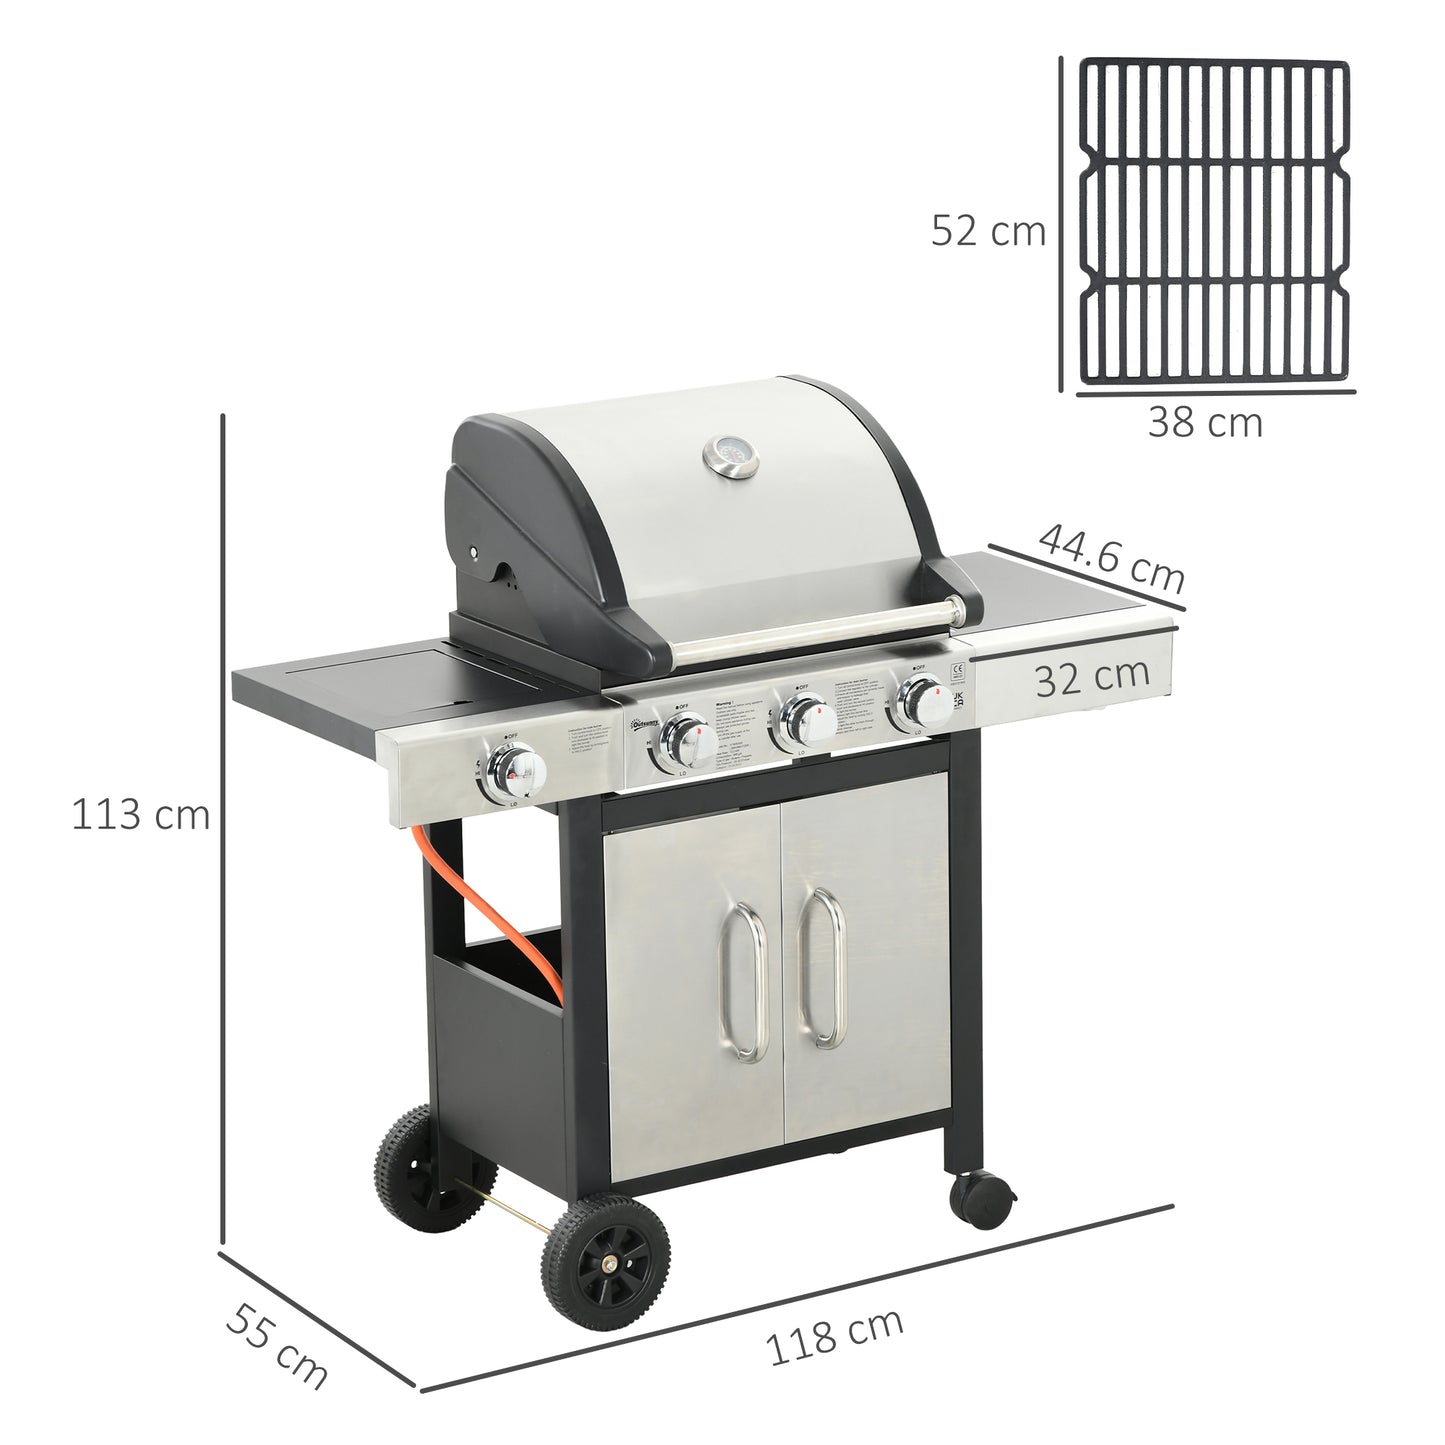 Outsunny Gas Barbecue Grill 3+1 Burner Garden Smoker BBQ Trolley w/ Side Burner Warming Rack Side Shelves Piezo Ignition Thermometer